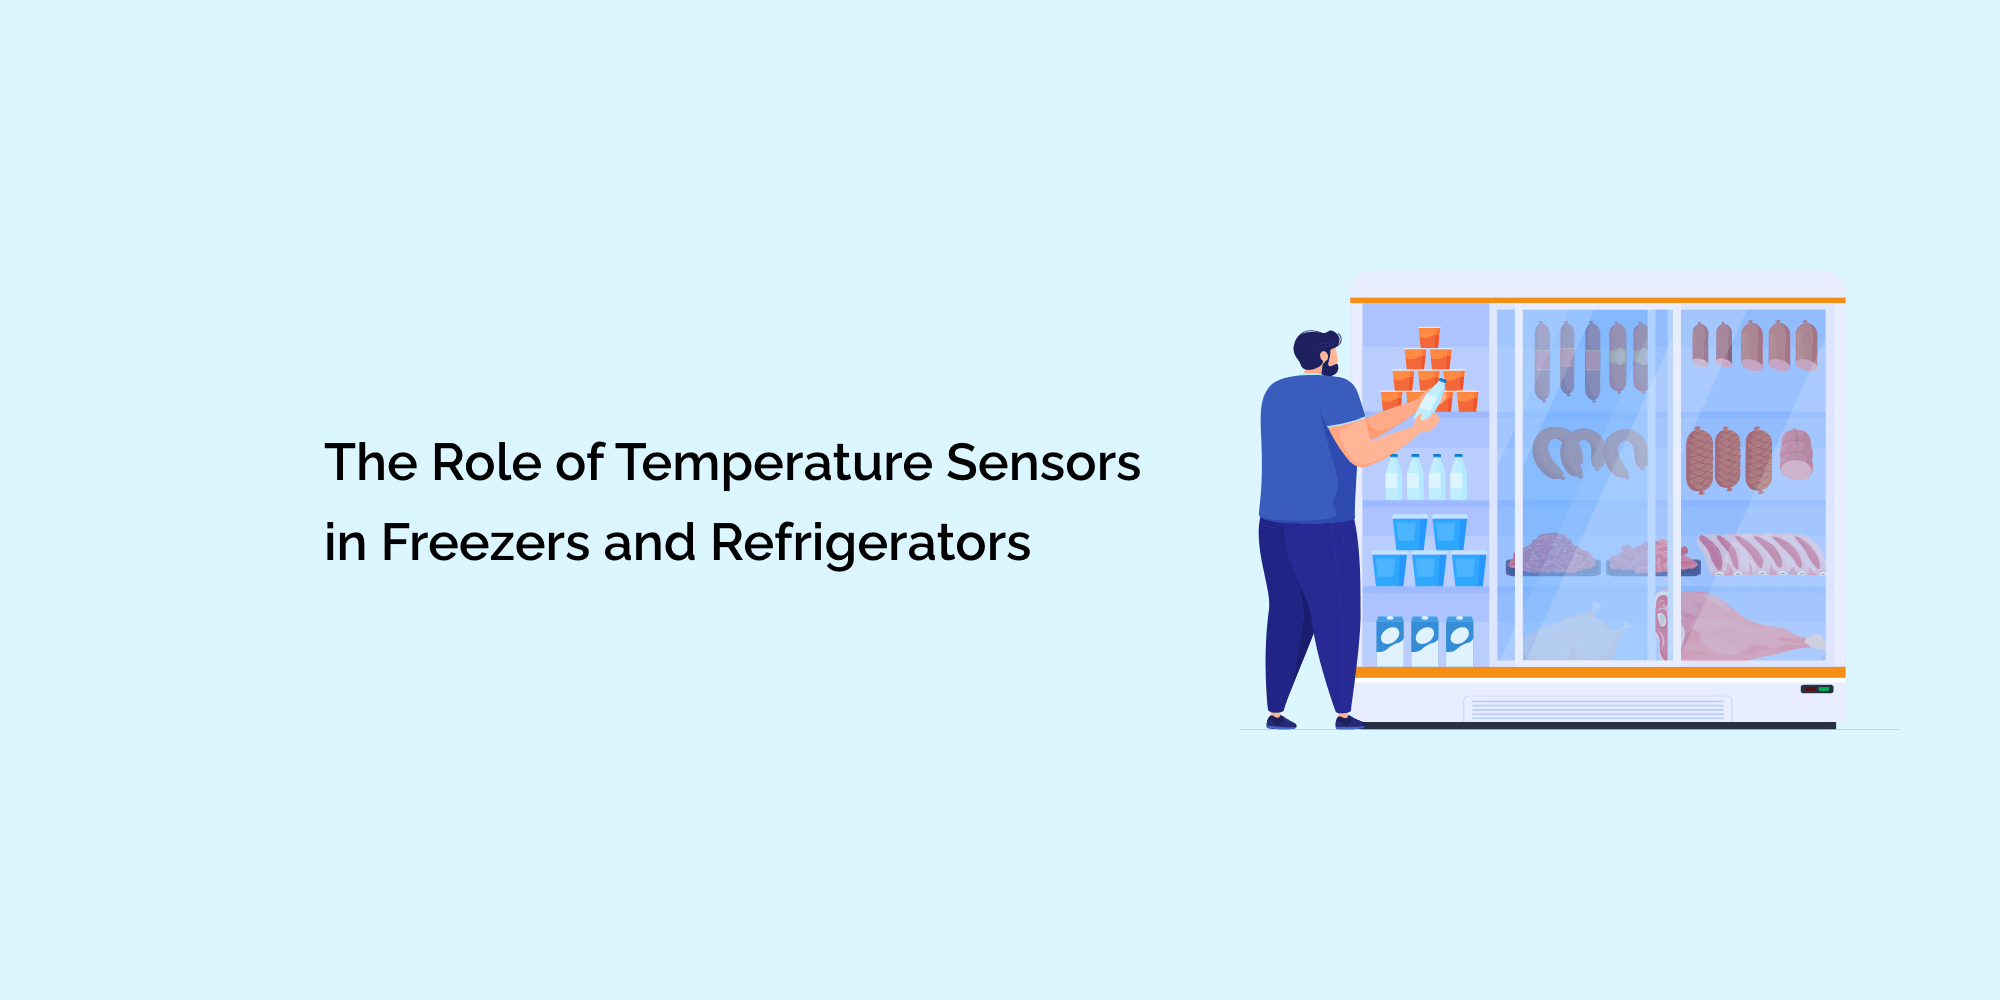 The Role of Temperature Sensors in Freezers and Refrigerators